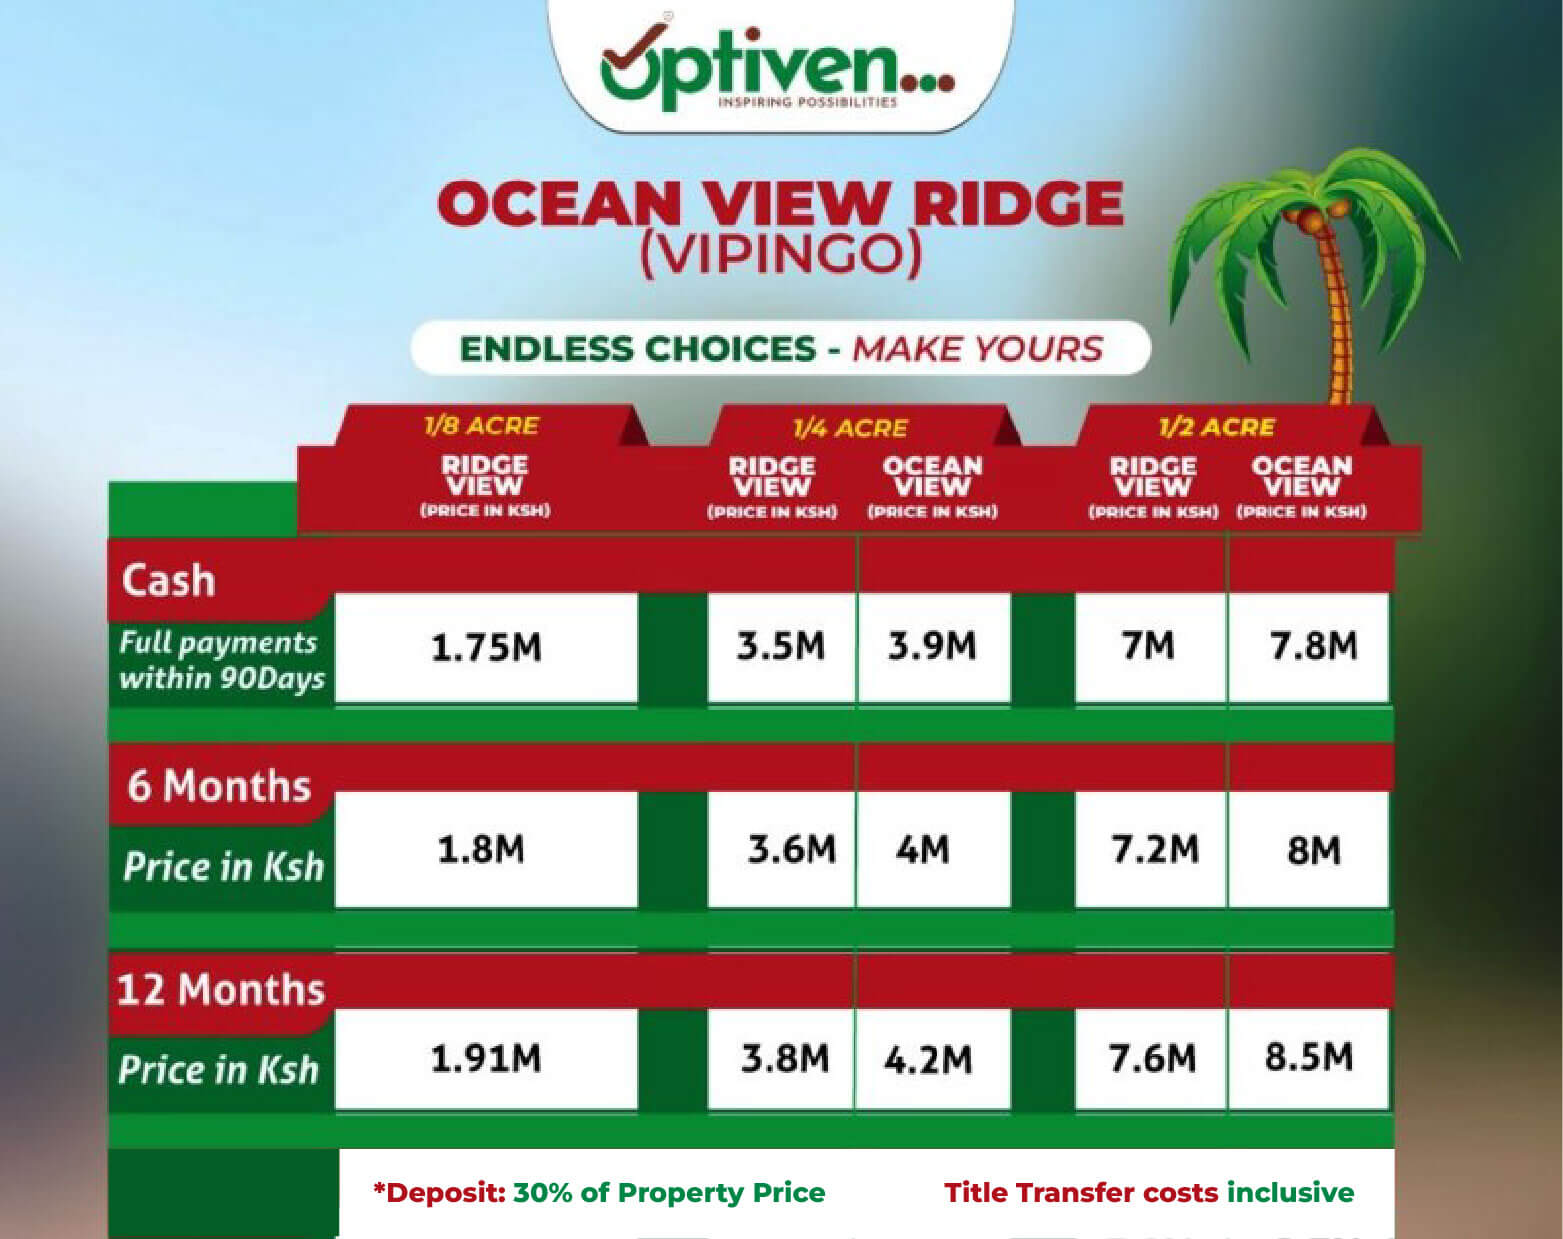 Ocean View Ridge - Value Added Plots for sale in Vipingo